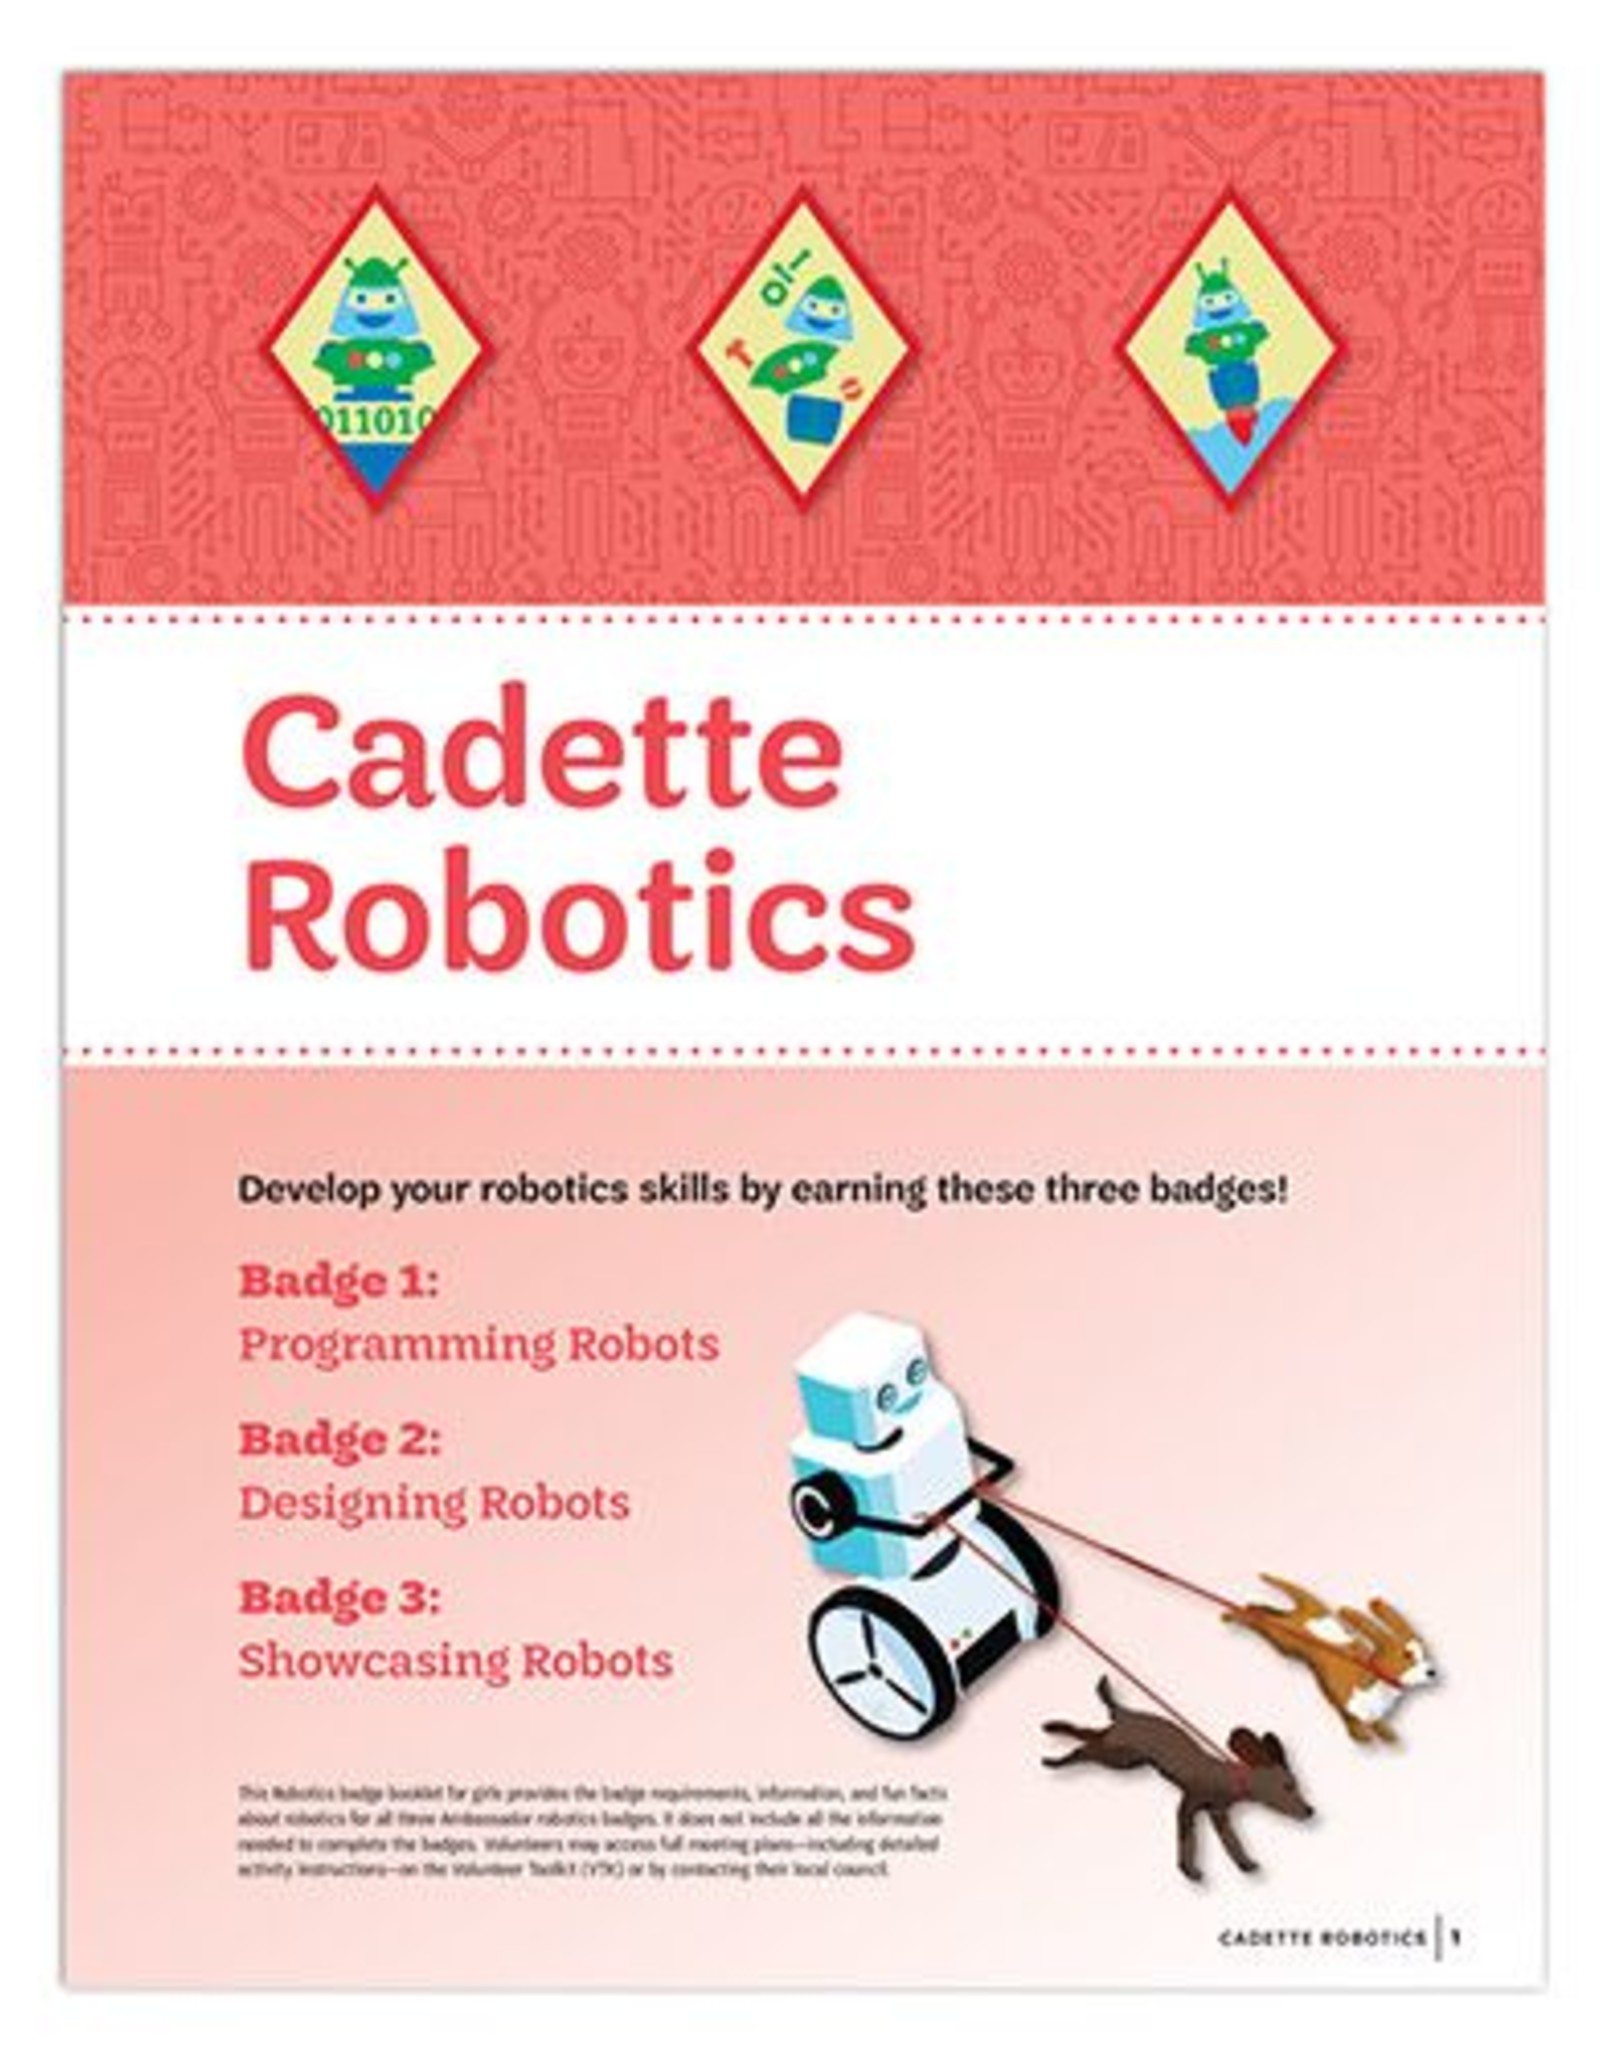 GIRL SCOUTS OF THE USA Cadette Robotics Requirements